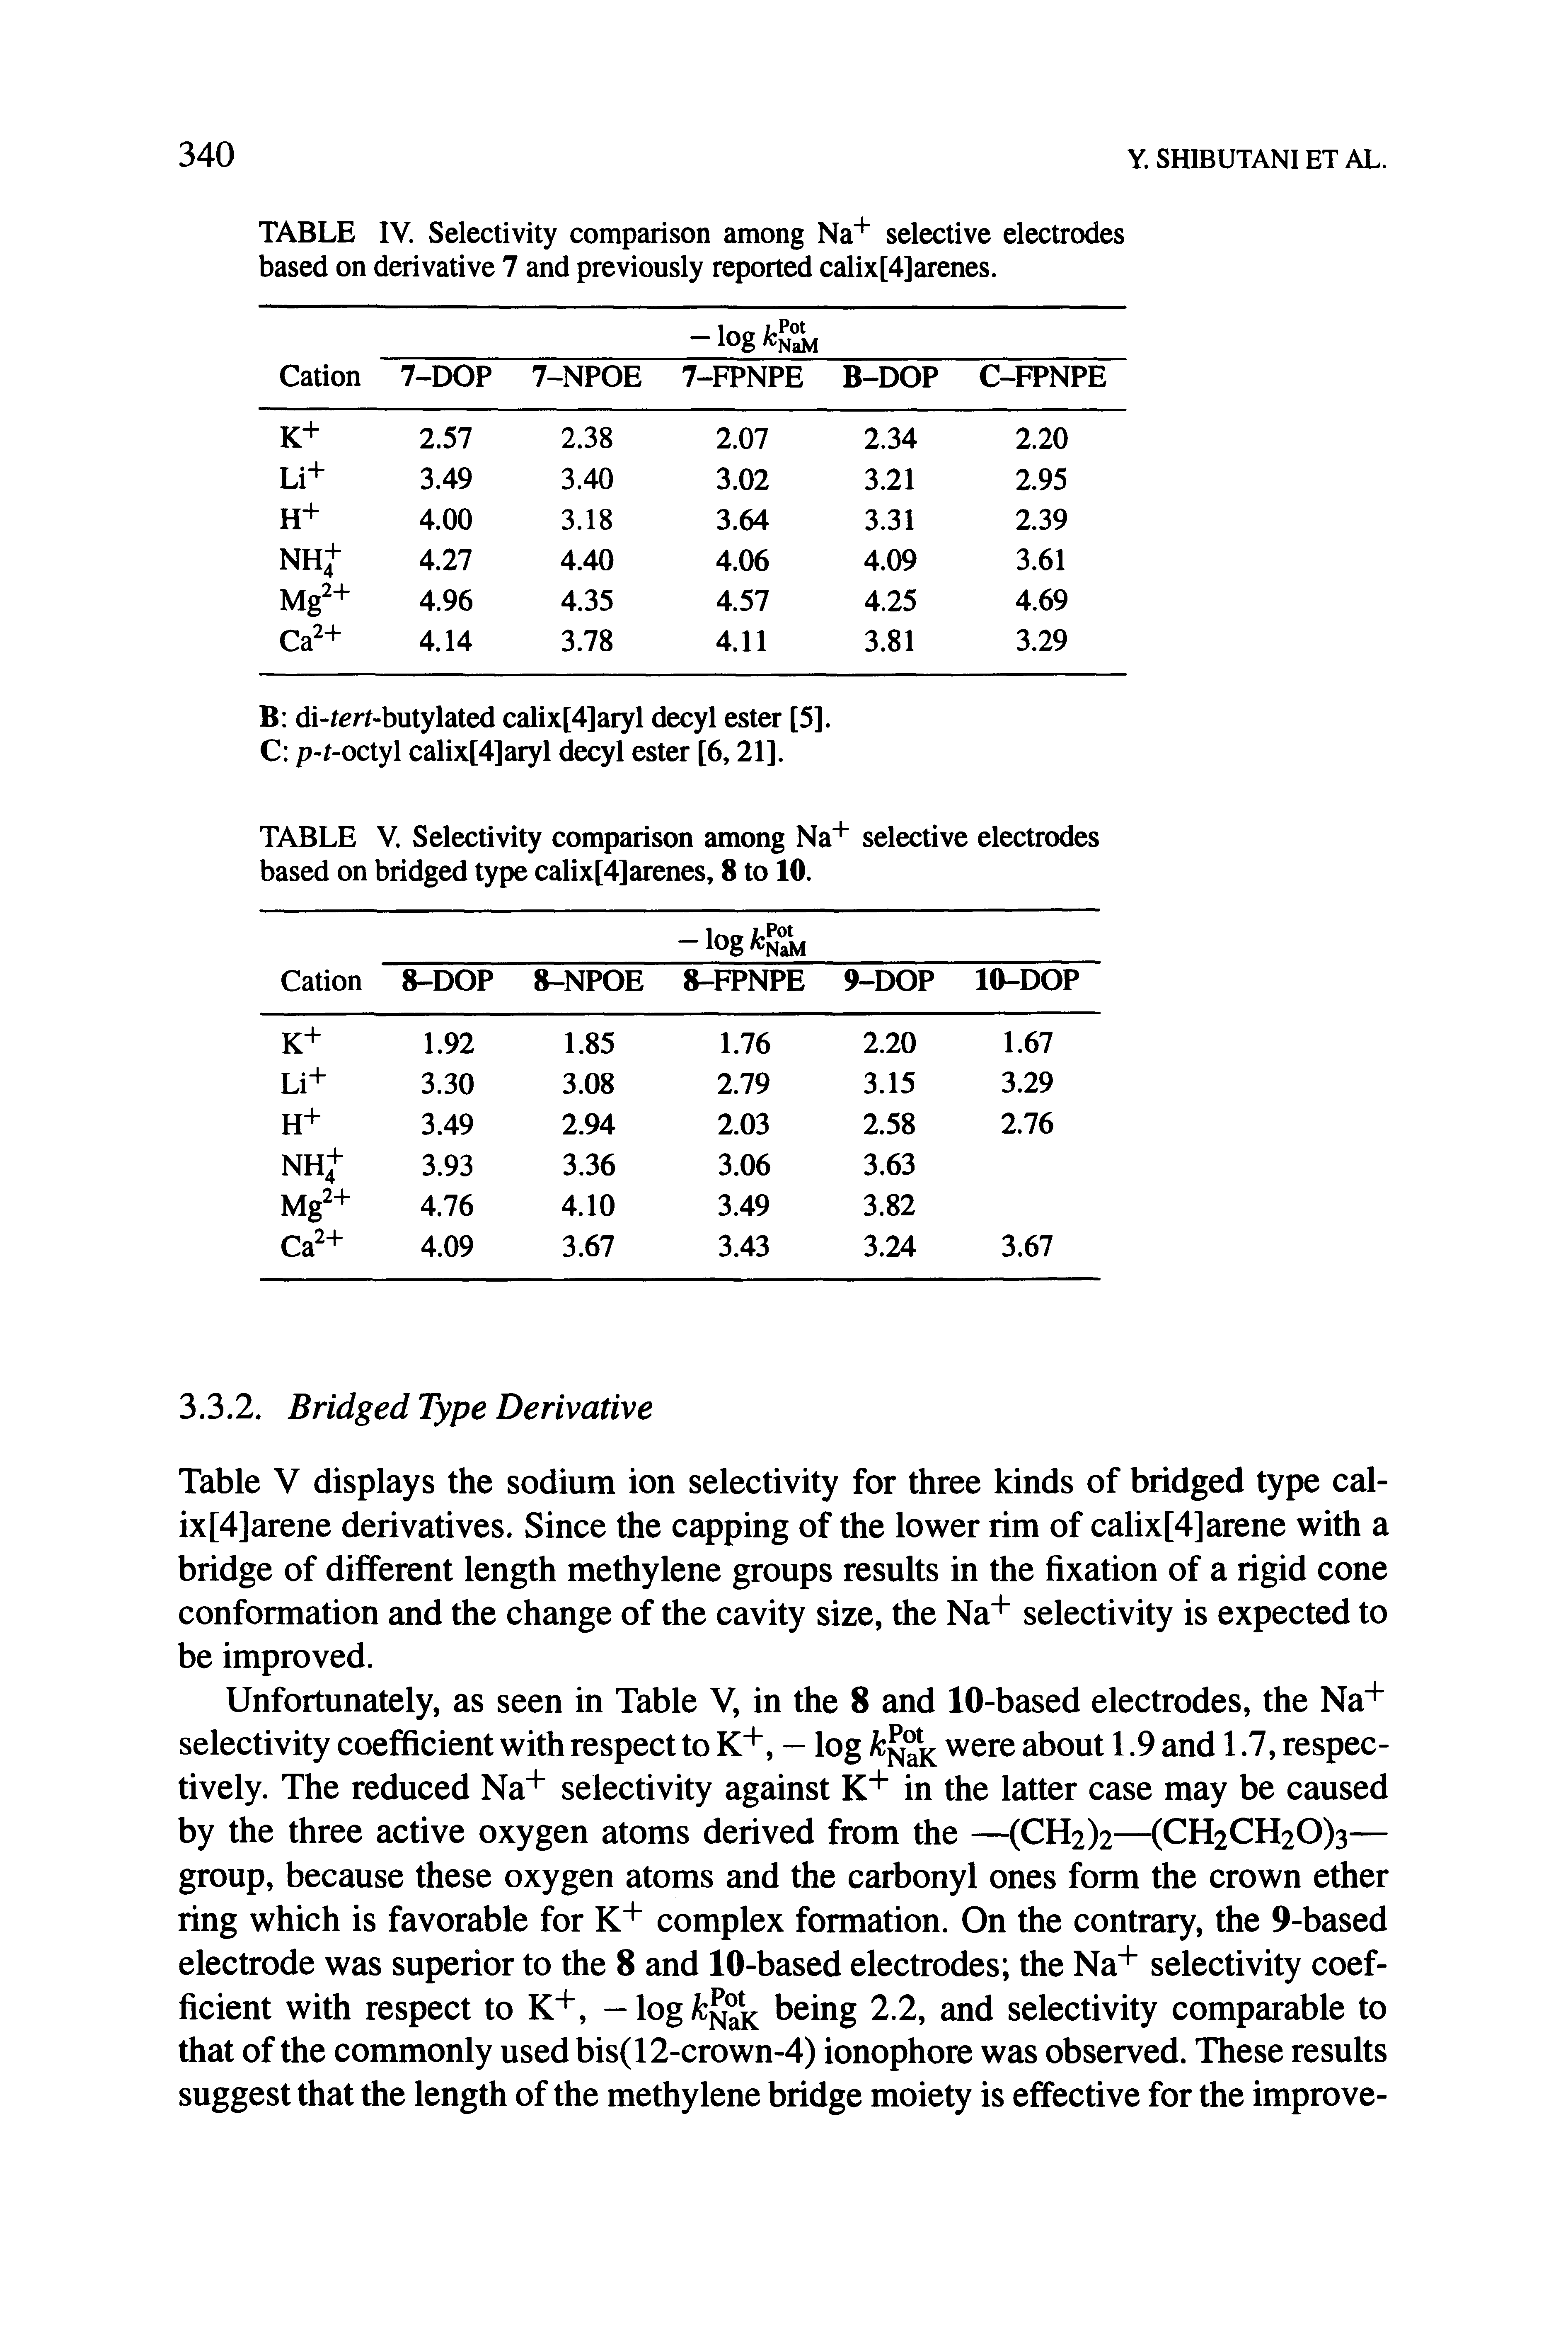 Table V displays the sodium ion selectivity for three kinds of bridged type cal-ix[4]arene derivatives. Since the capping of the lower rim of calix[4]arene with a bridge of different length methylene groups results in the fixation of a rigid cone conformation and the change of the cavity size, the Na" " selectivity is expected to be improved.